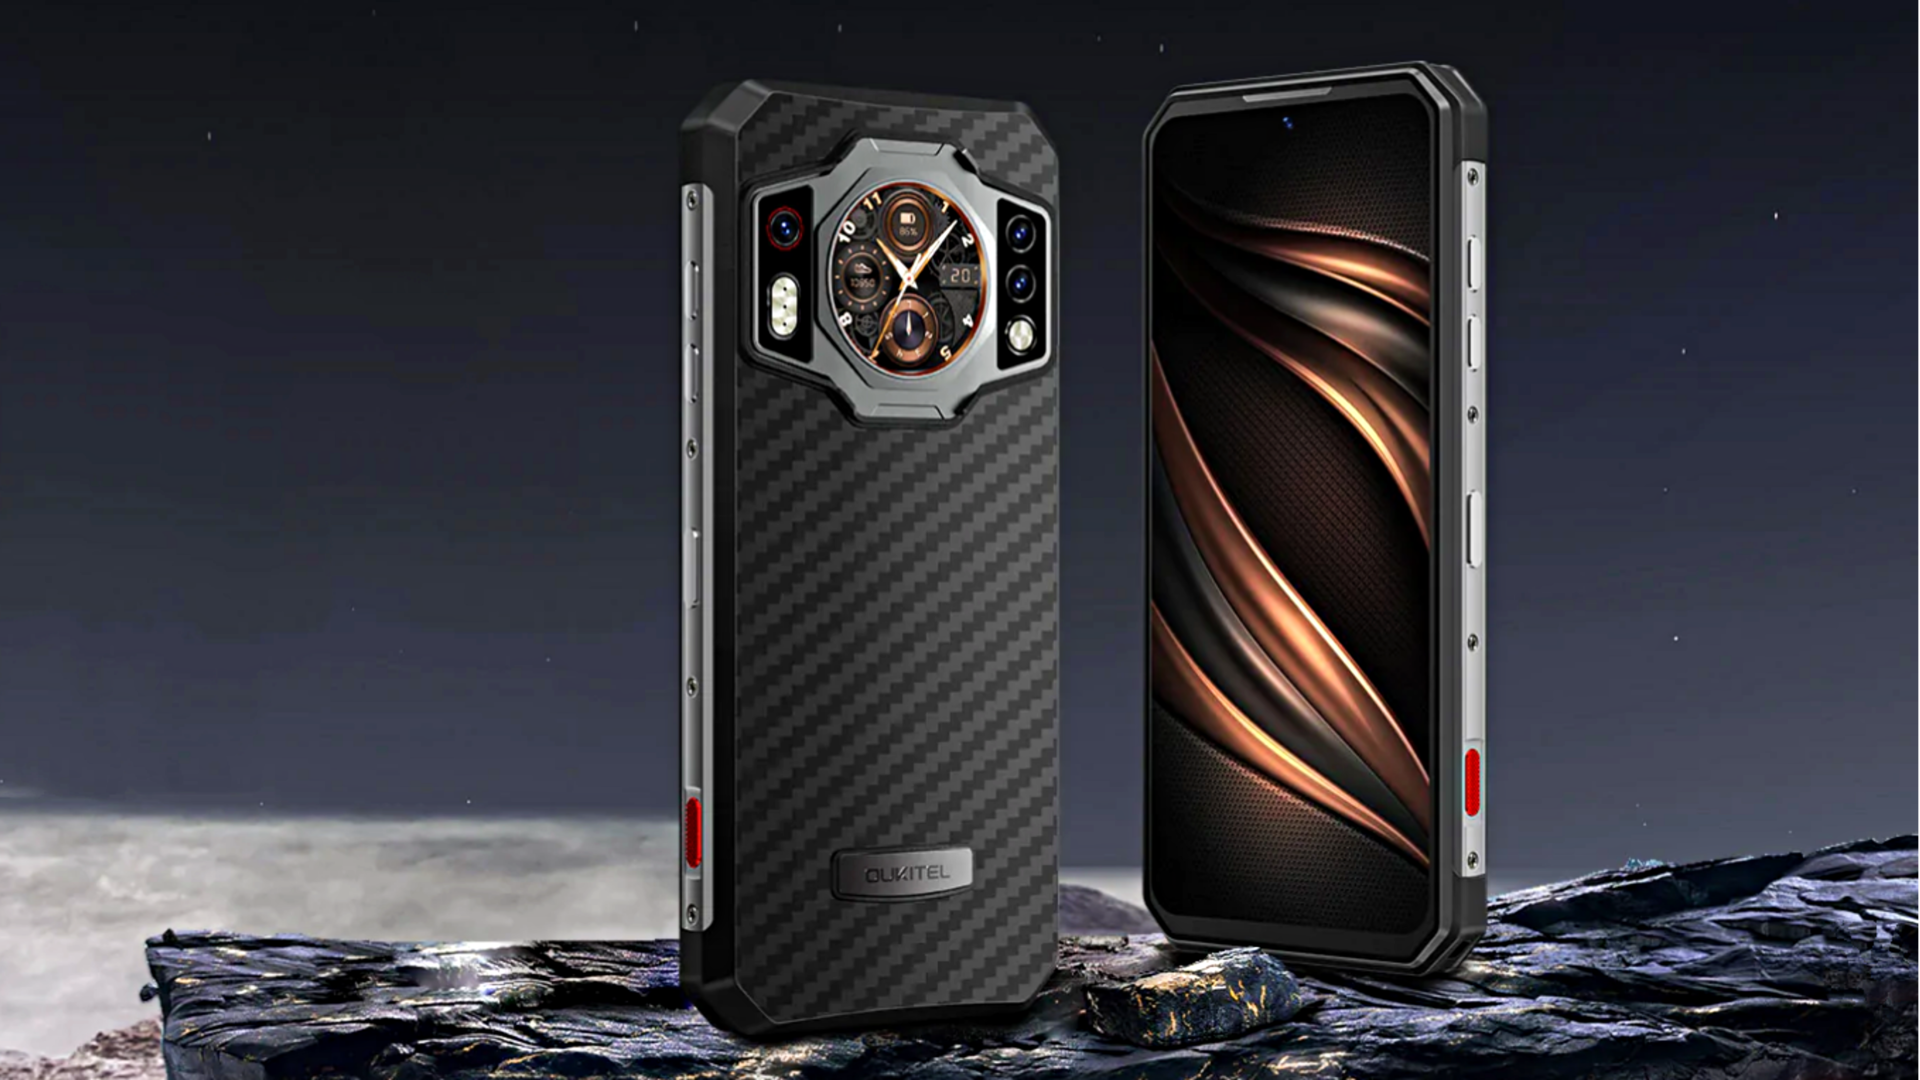 Oukitel WP21 rugged smartphone goes official: Should you buy it?